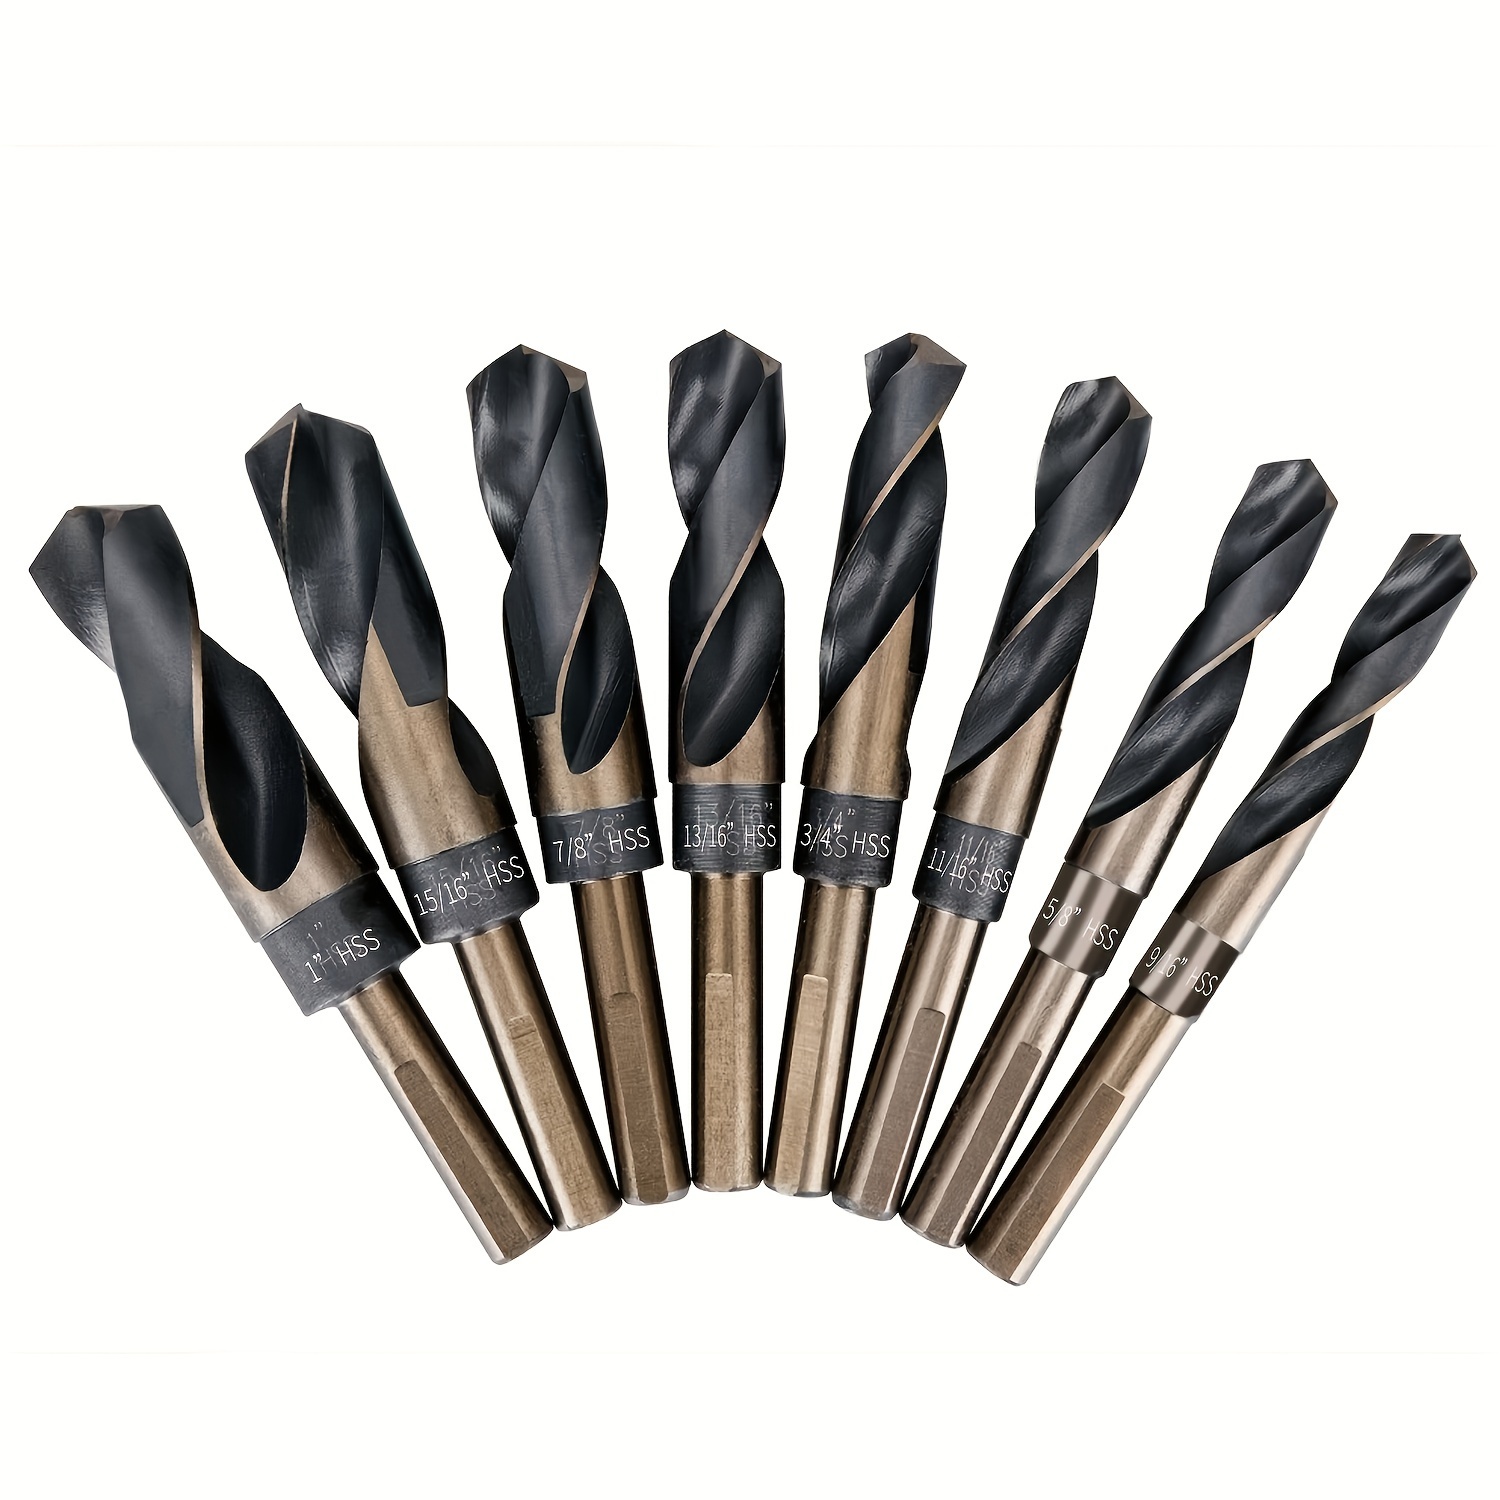 

8pcs/bag M2 High Speed Steel Equal Shank Twist Drill Bits Set, Available In Pouch And Aluminum Carrying Case, 135 Degree Open Edge Tip Sae Inch Size